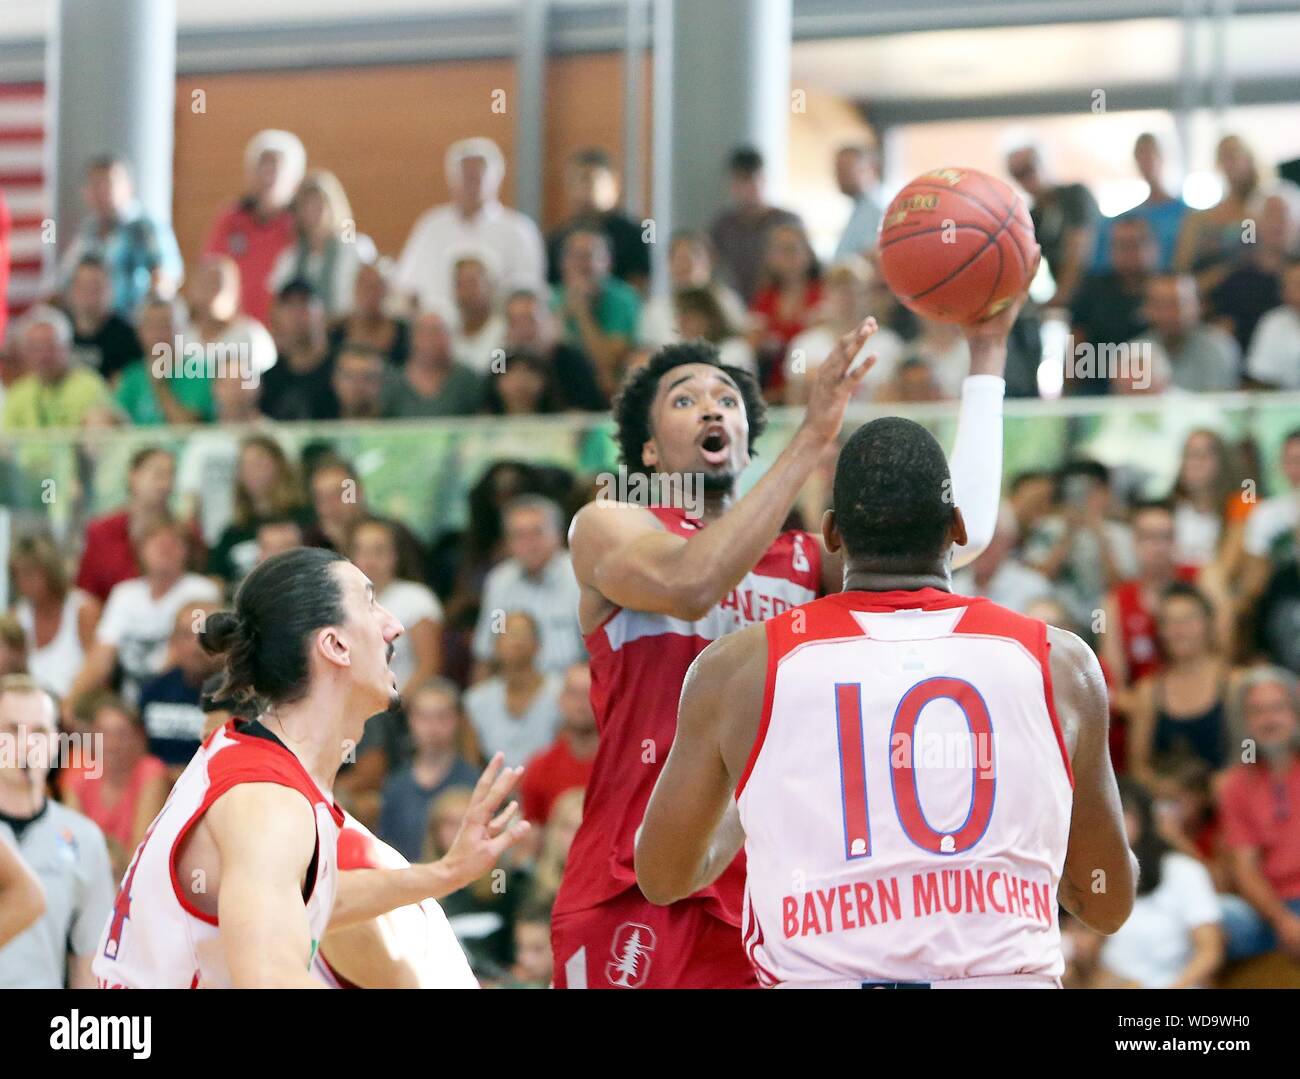 Rosenheim, Germnany. 27th Aug, 2019. in the middle Bryce WILLS (Stanford),  .mens Basketball, pre season friendly, Aug 27, 2019, FC Bayern Muenchen  Basketball vs Stanford University, Rosenheim, Gabor Hall, as first pre